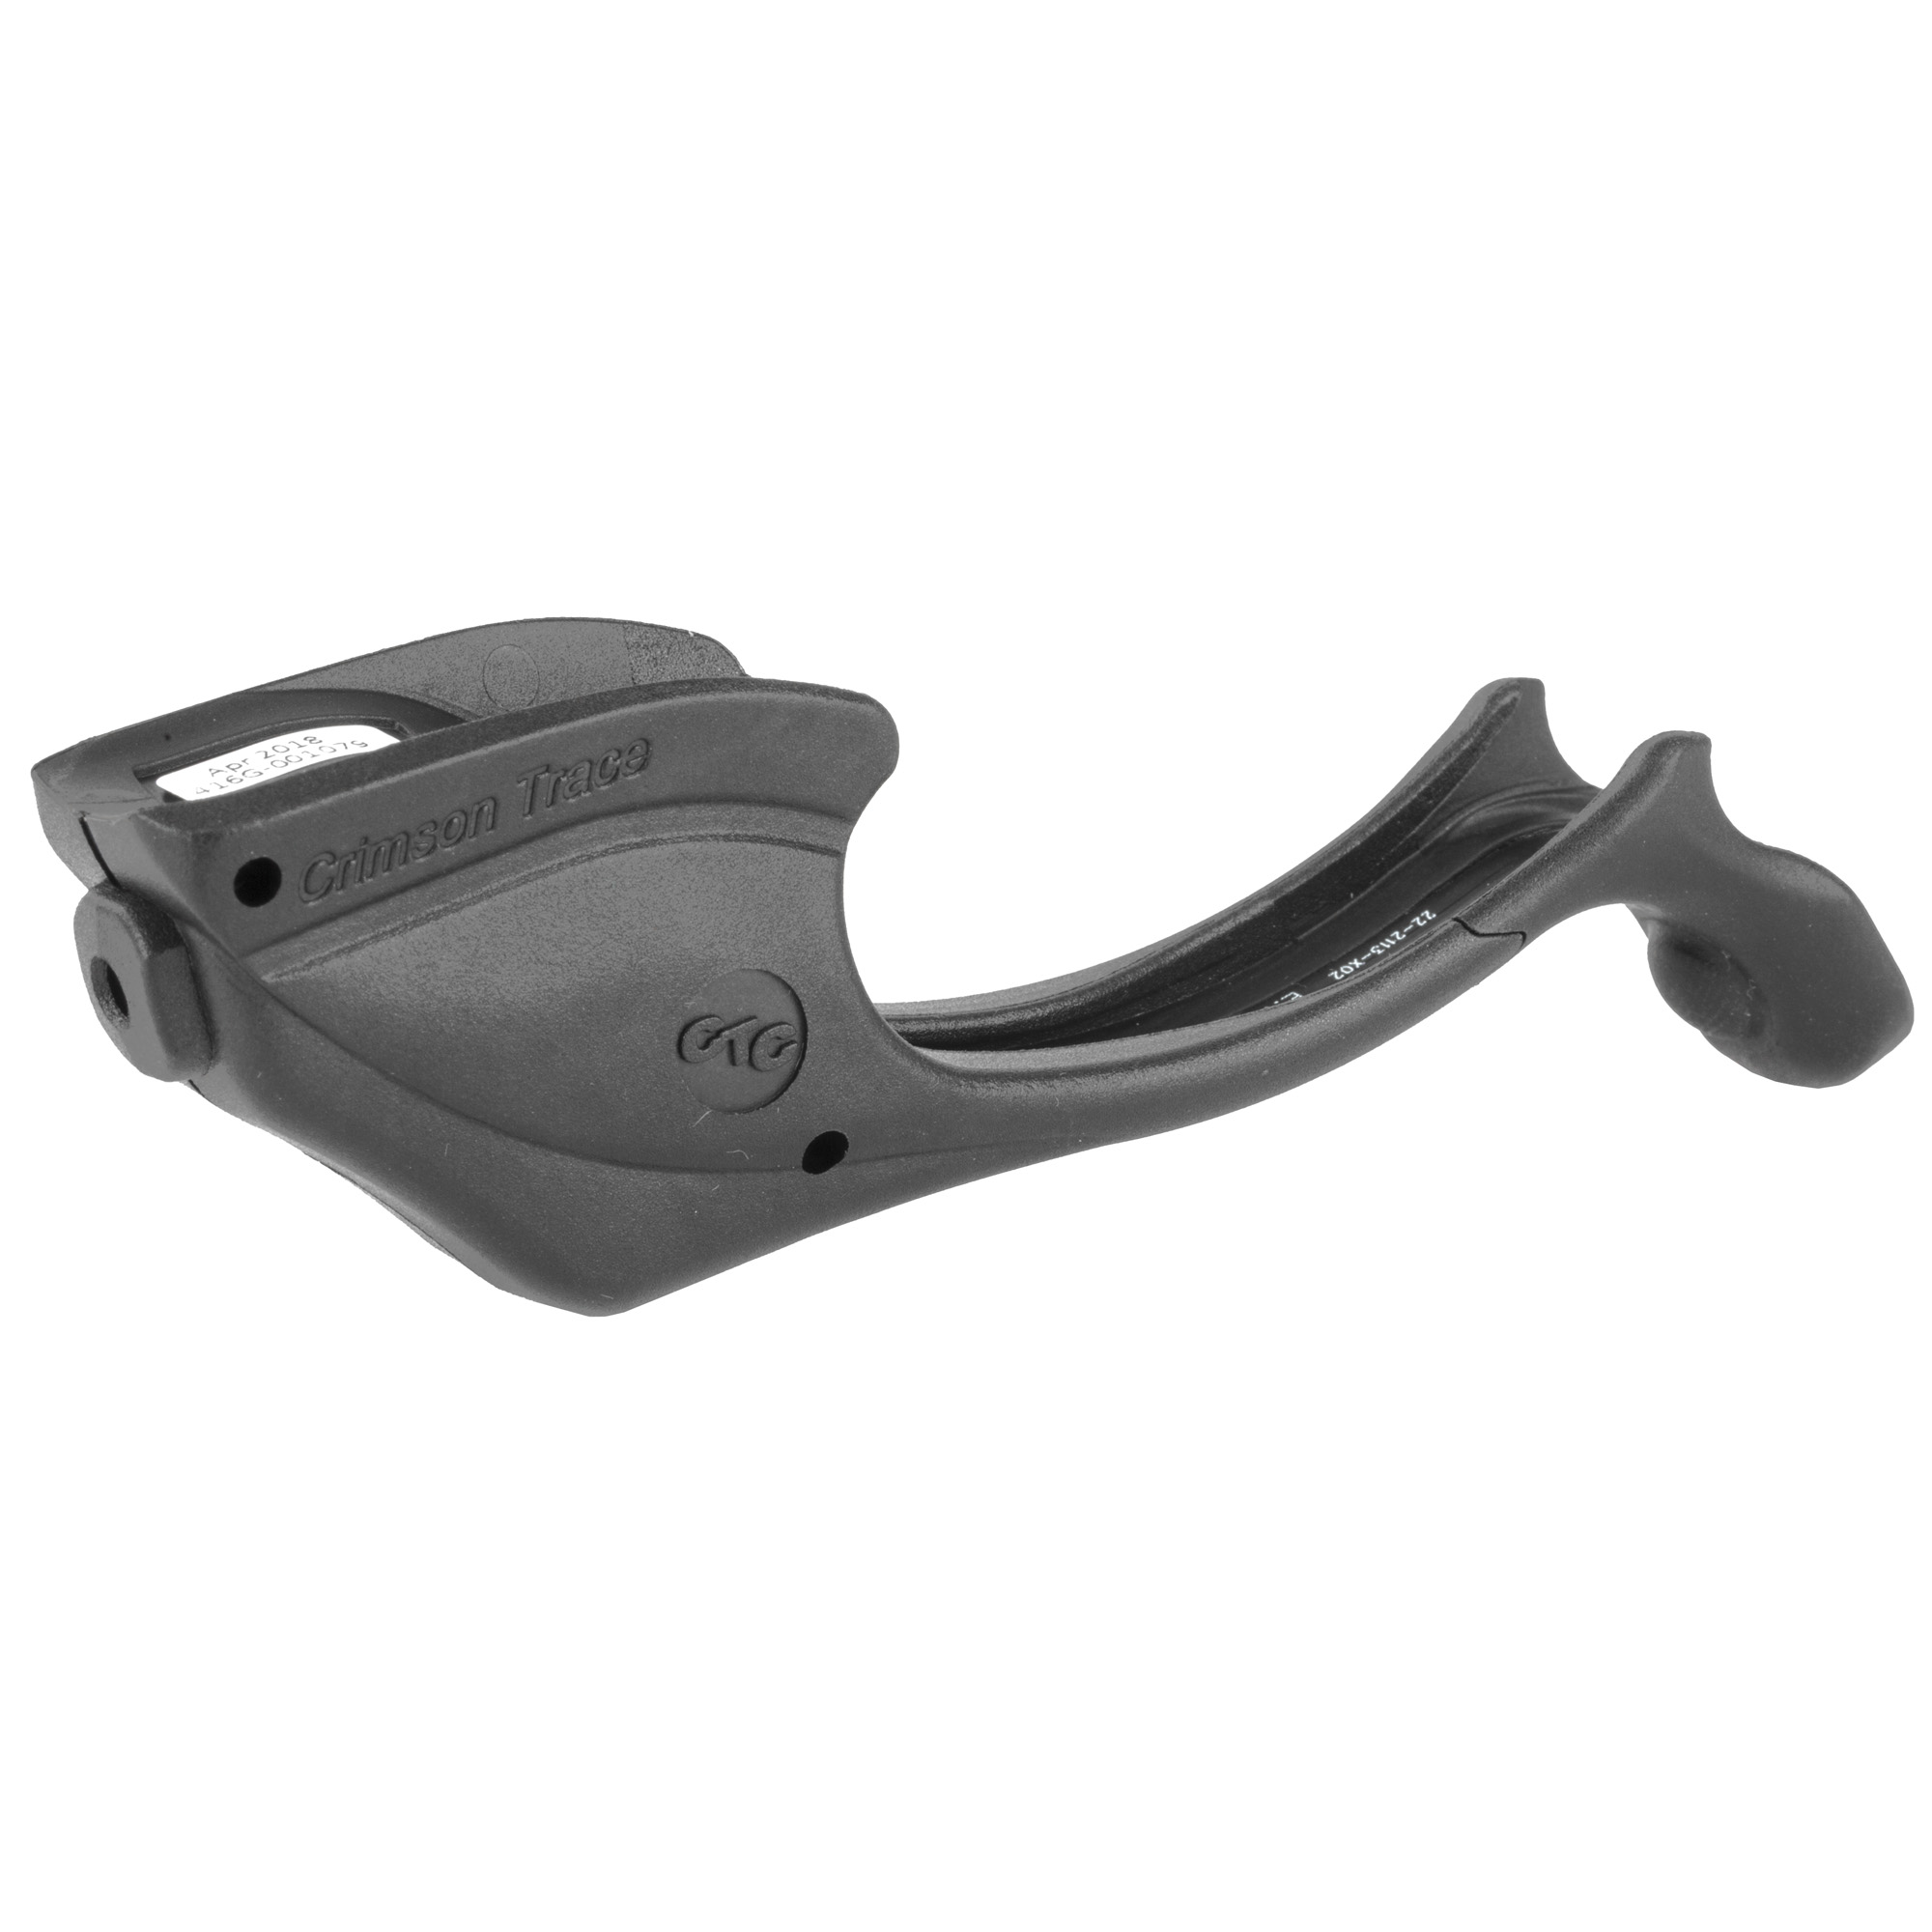 Ctc Laserguard Ruger Lc9 Grn